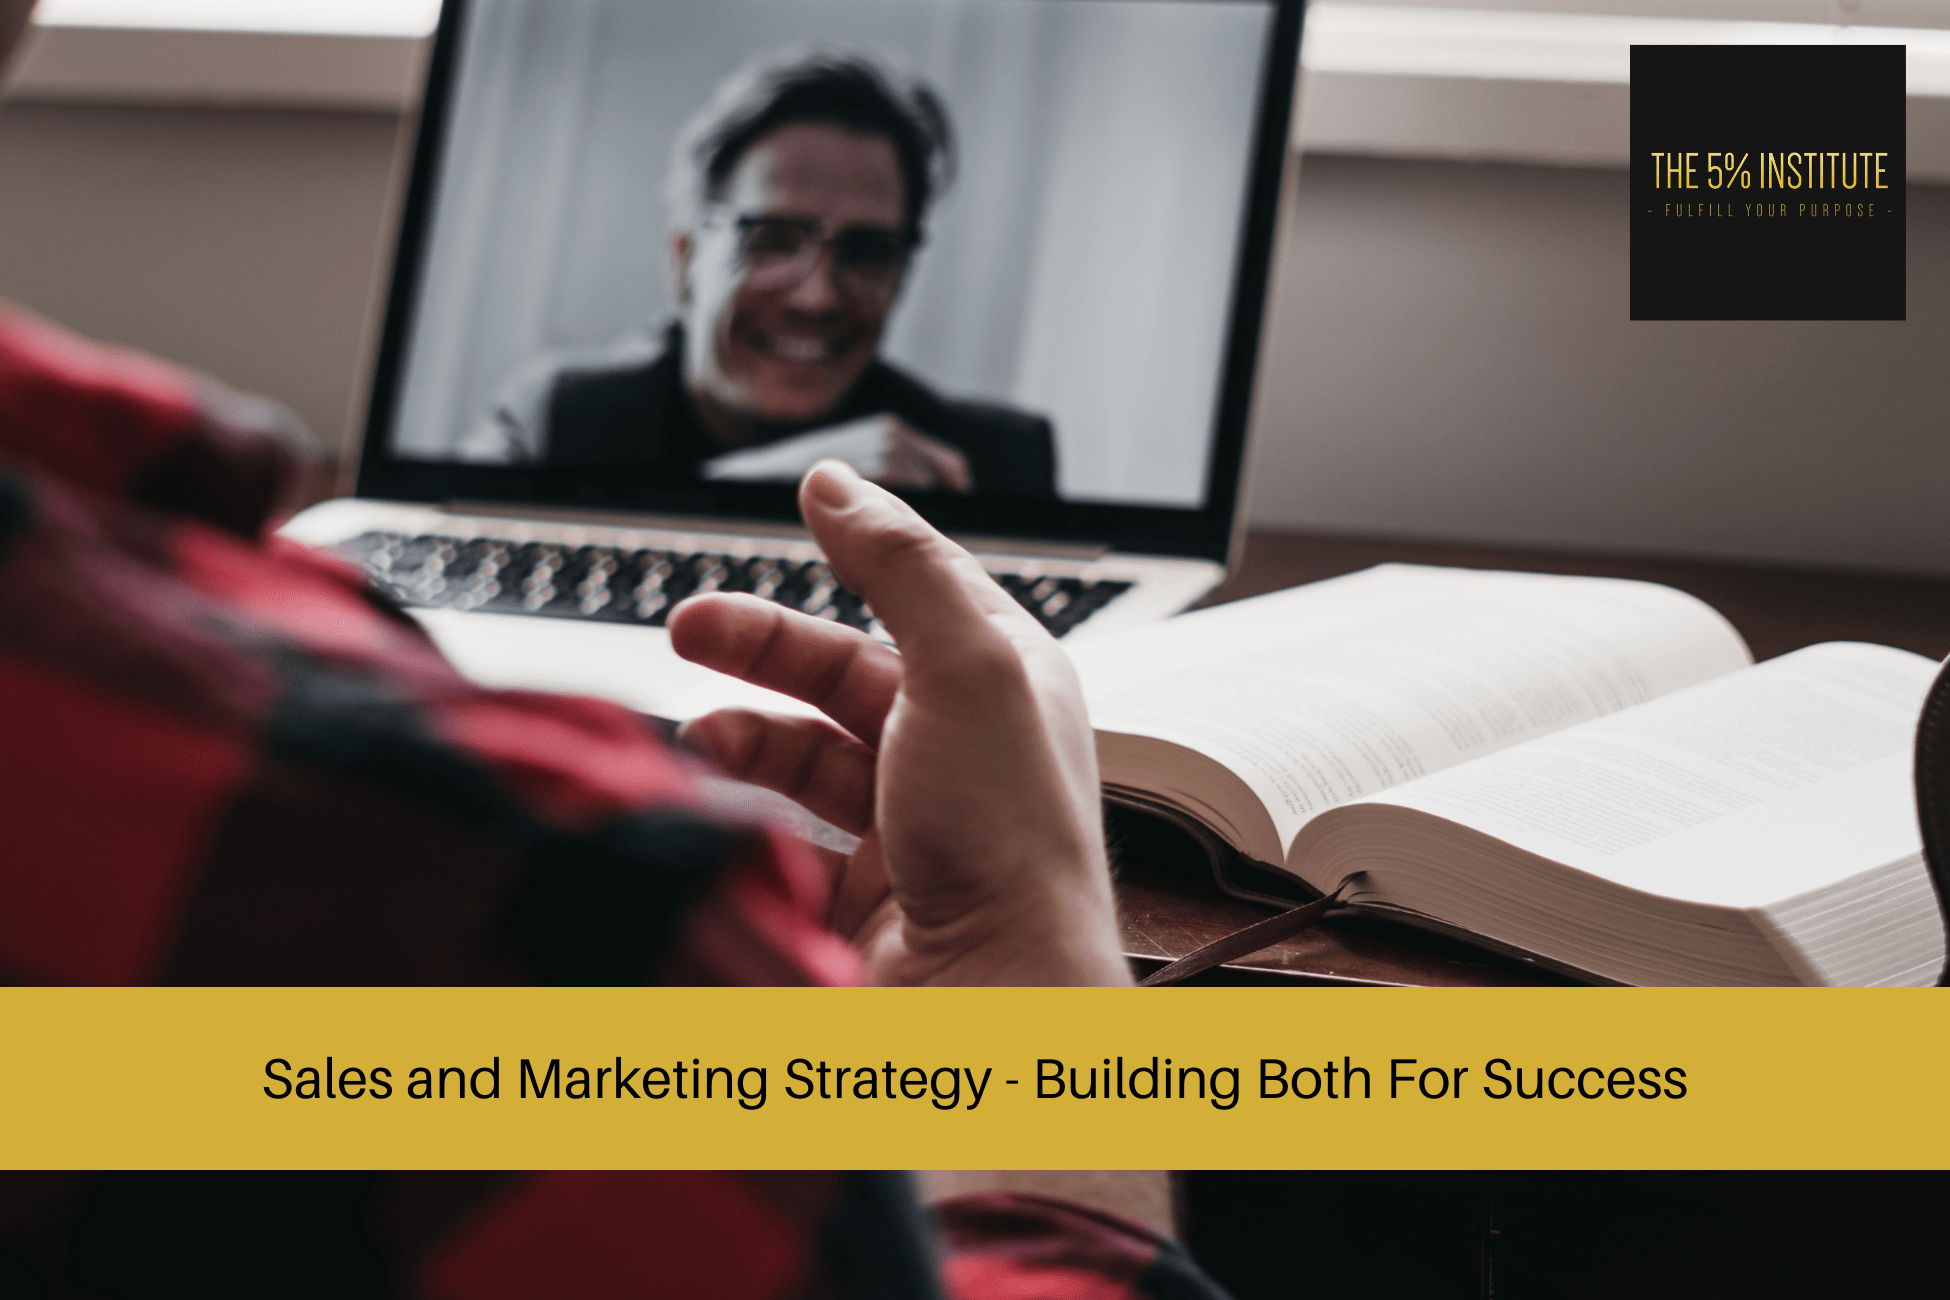 Sales and Marketing Strategy - Building Both For Success